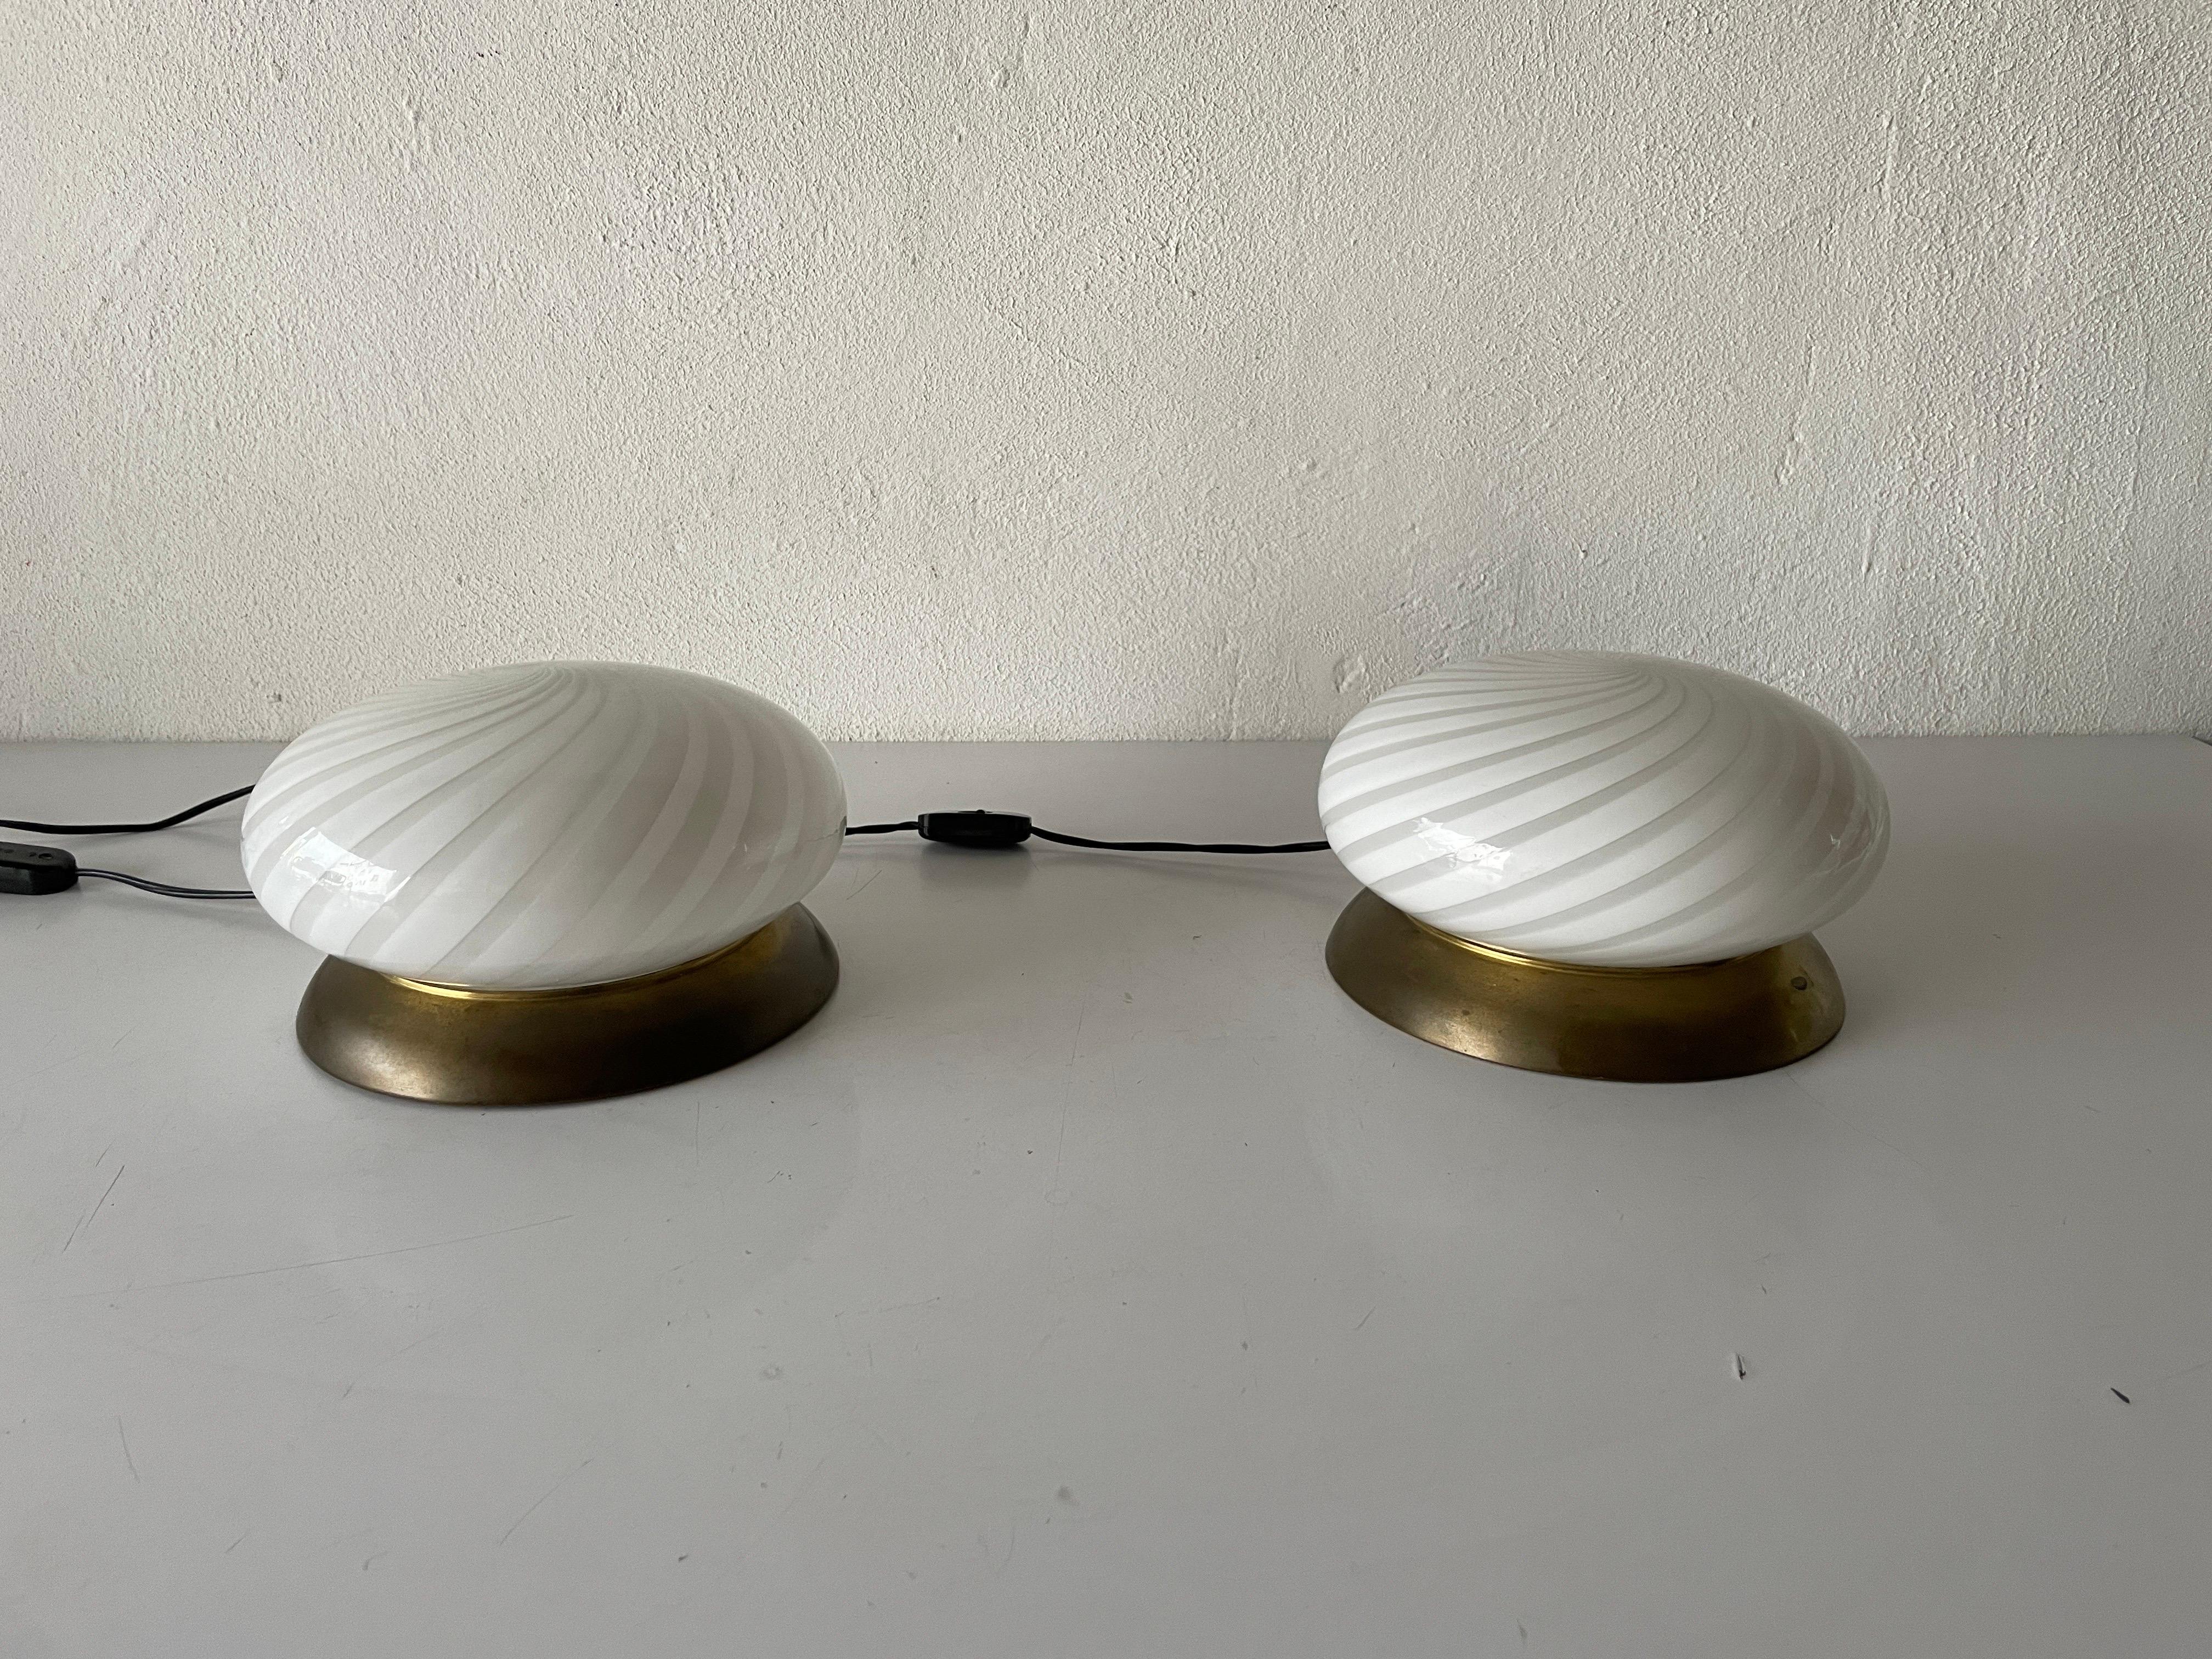 Pair of table lamps by Milano-Industria Lampadari Lamter, 1950s, Italy.

Lampshade is in very good vintage condition.

It has European plug. It can be converted to other countries plugs with using converter. Also it can be rewired different type